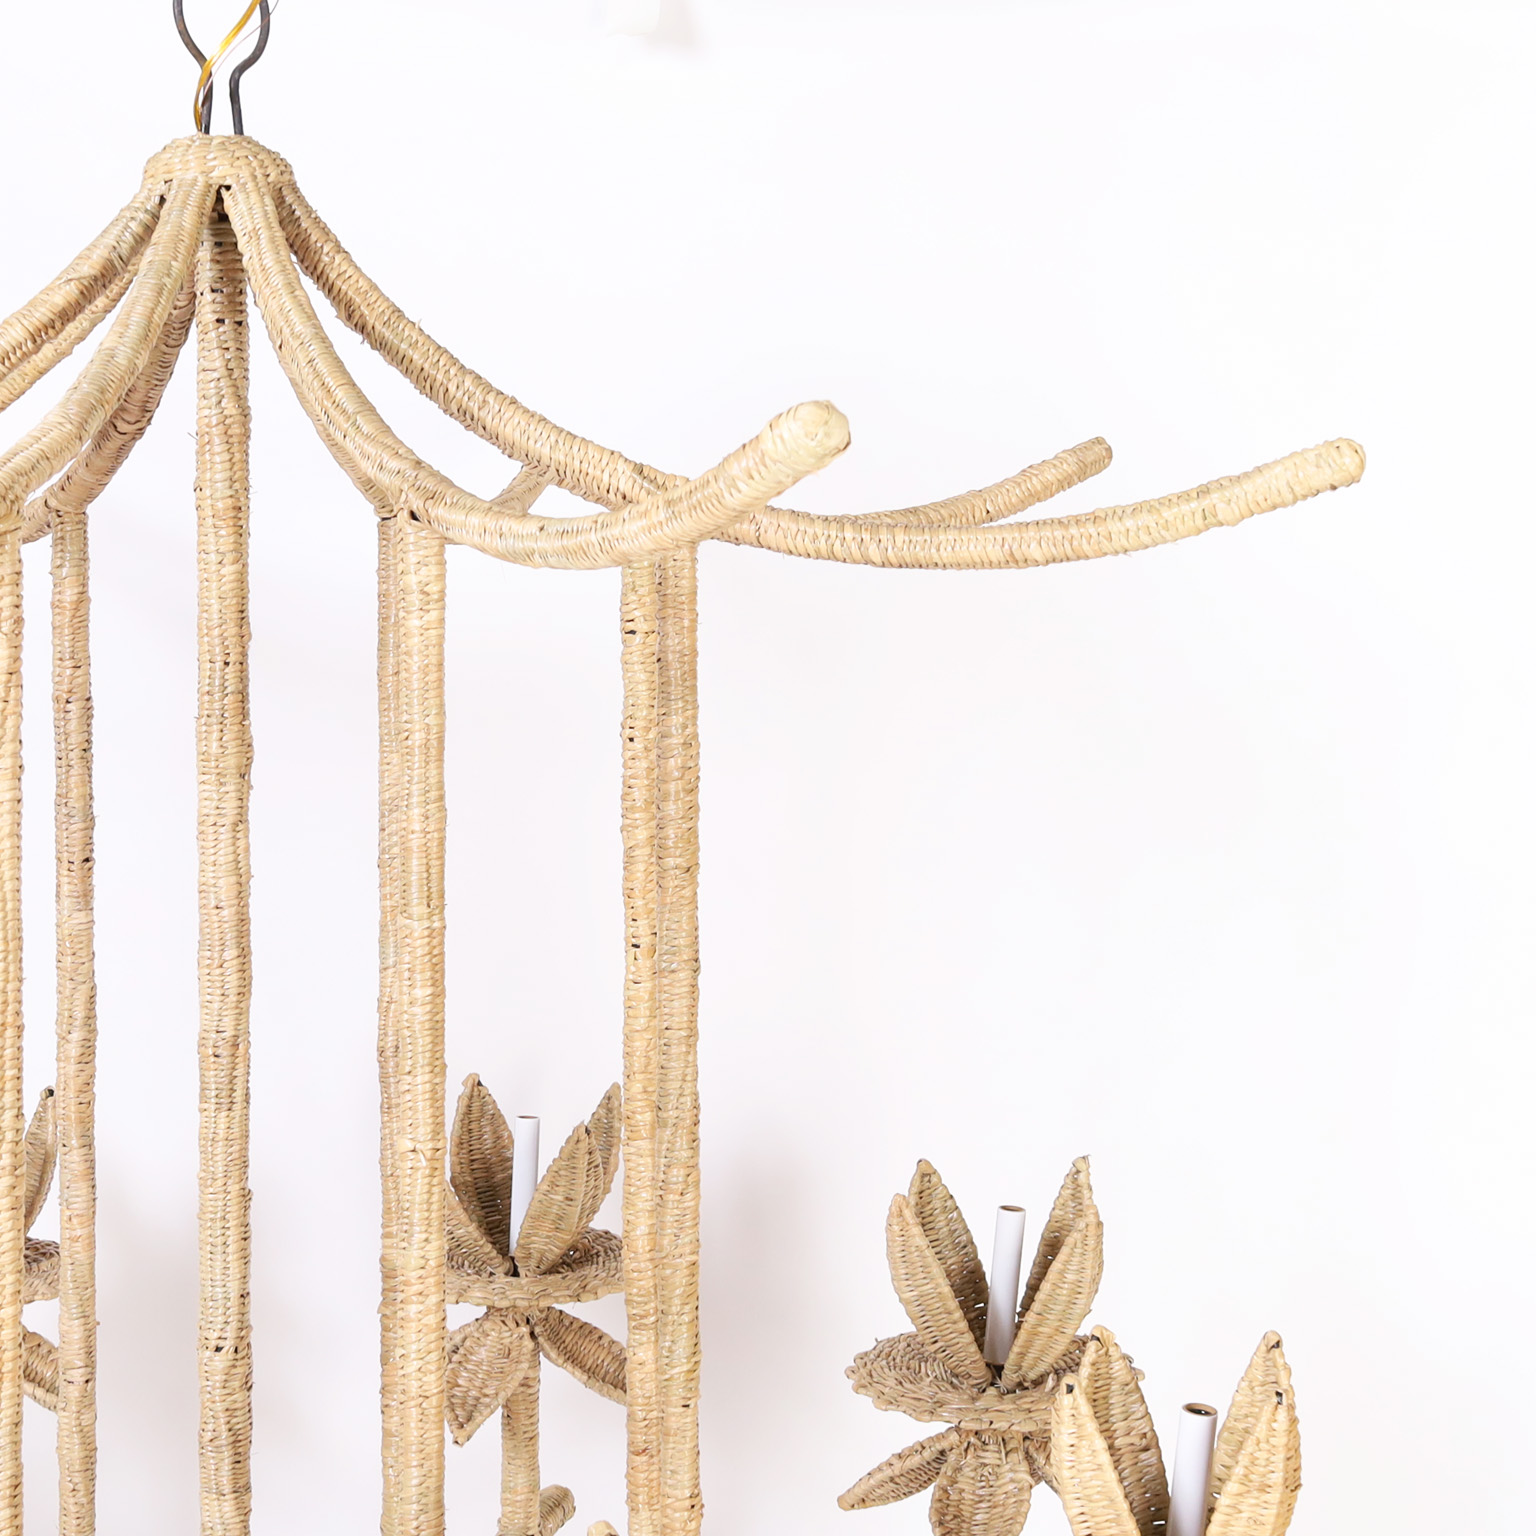 Woven Reed Pagoda Form Chandelier or Light Fixture from the FS Flores Collection